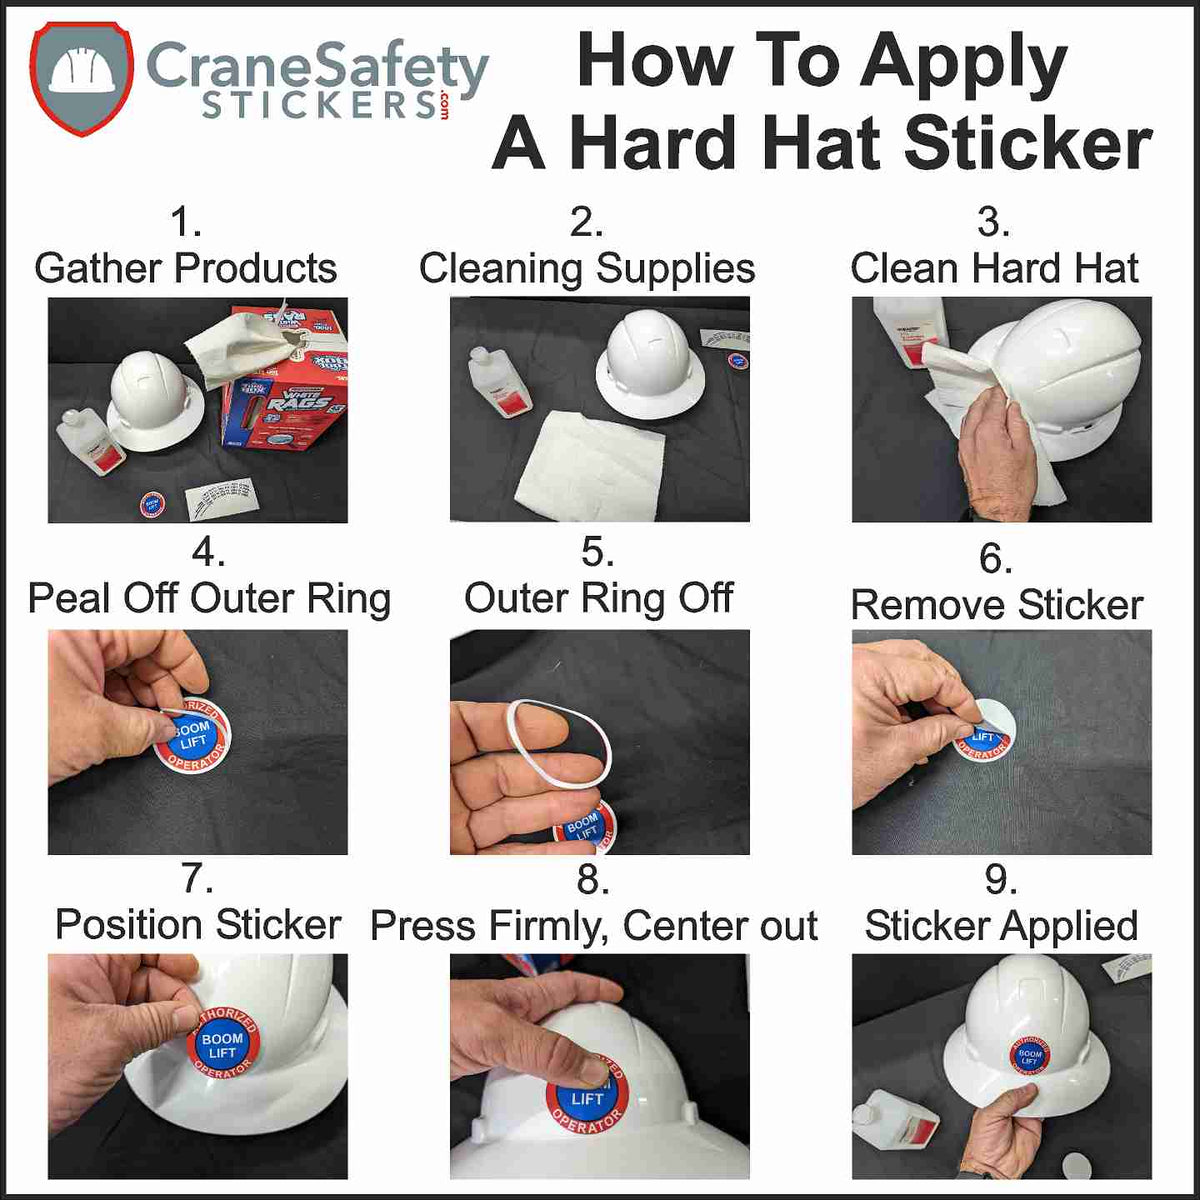 Directions on how to apply a air tank sticker to a hard hat. although this sticker would most likely be applied to an air tank. The same instructions imply. You would just apply to an air tank instead of a hard hat.